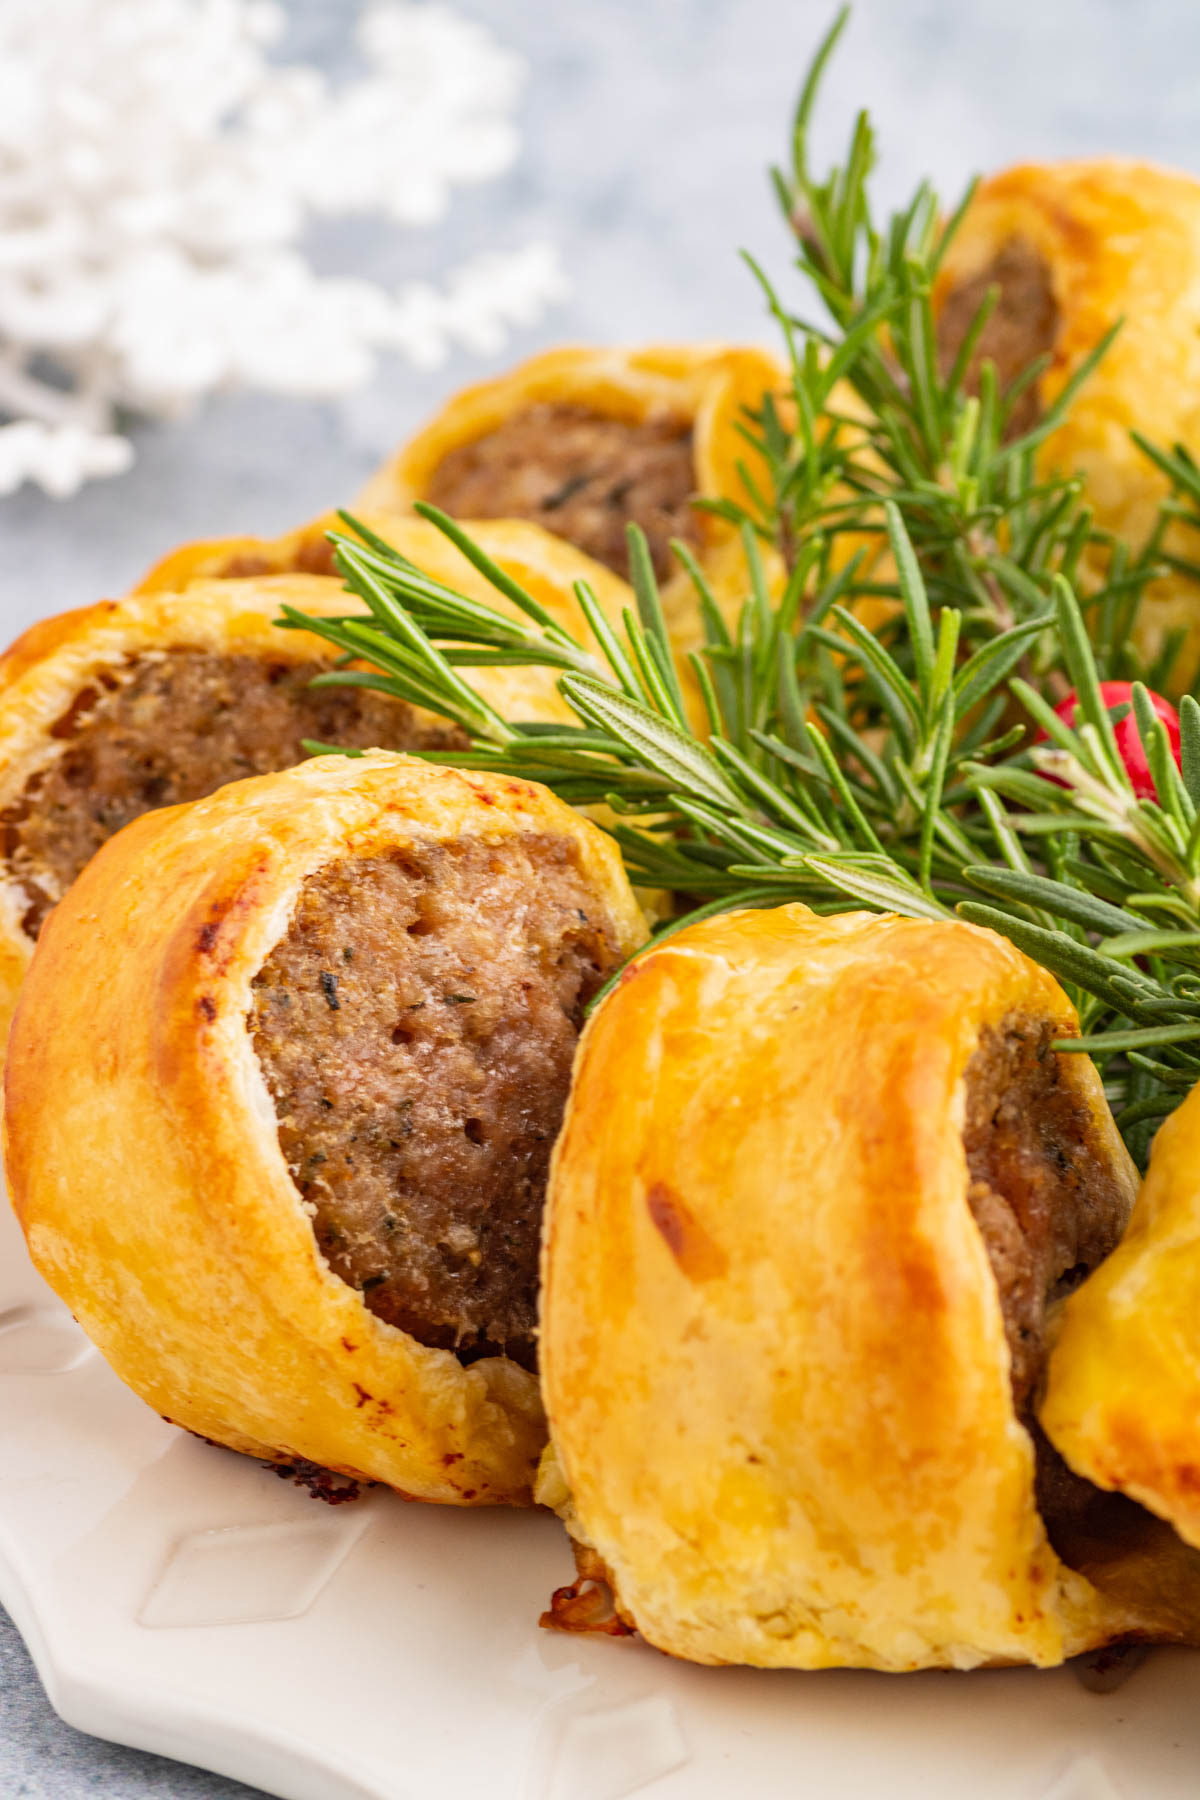 A festive golden baked sausage roll wreath garnished with fresh rosemary.